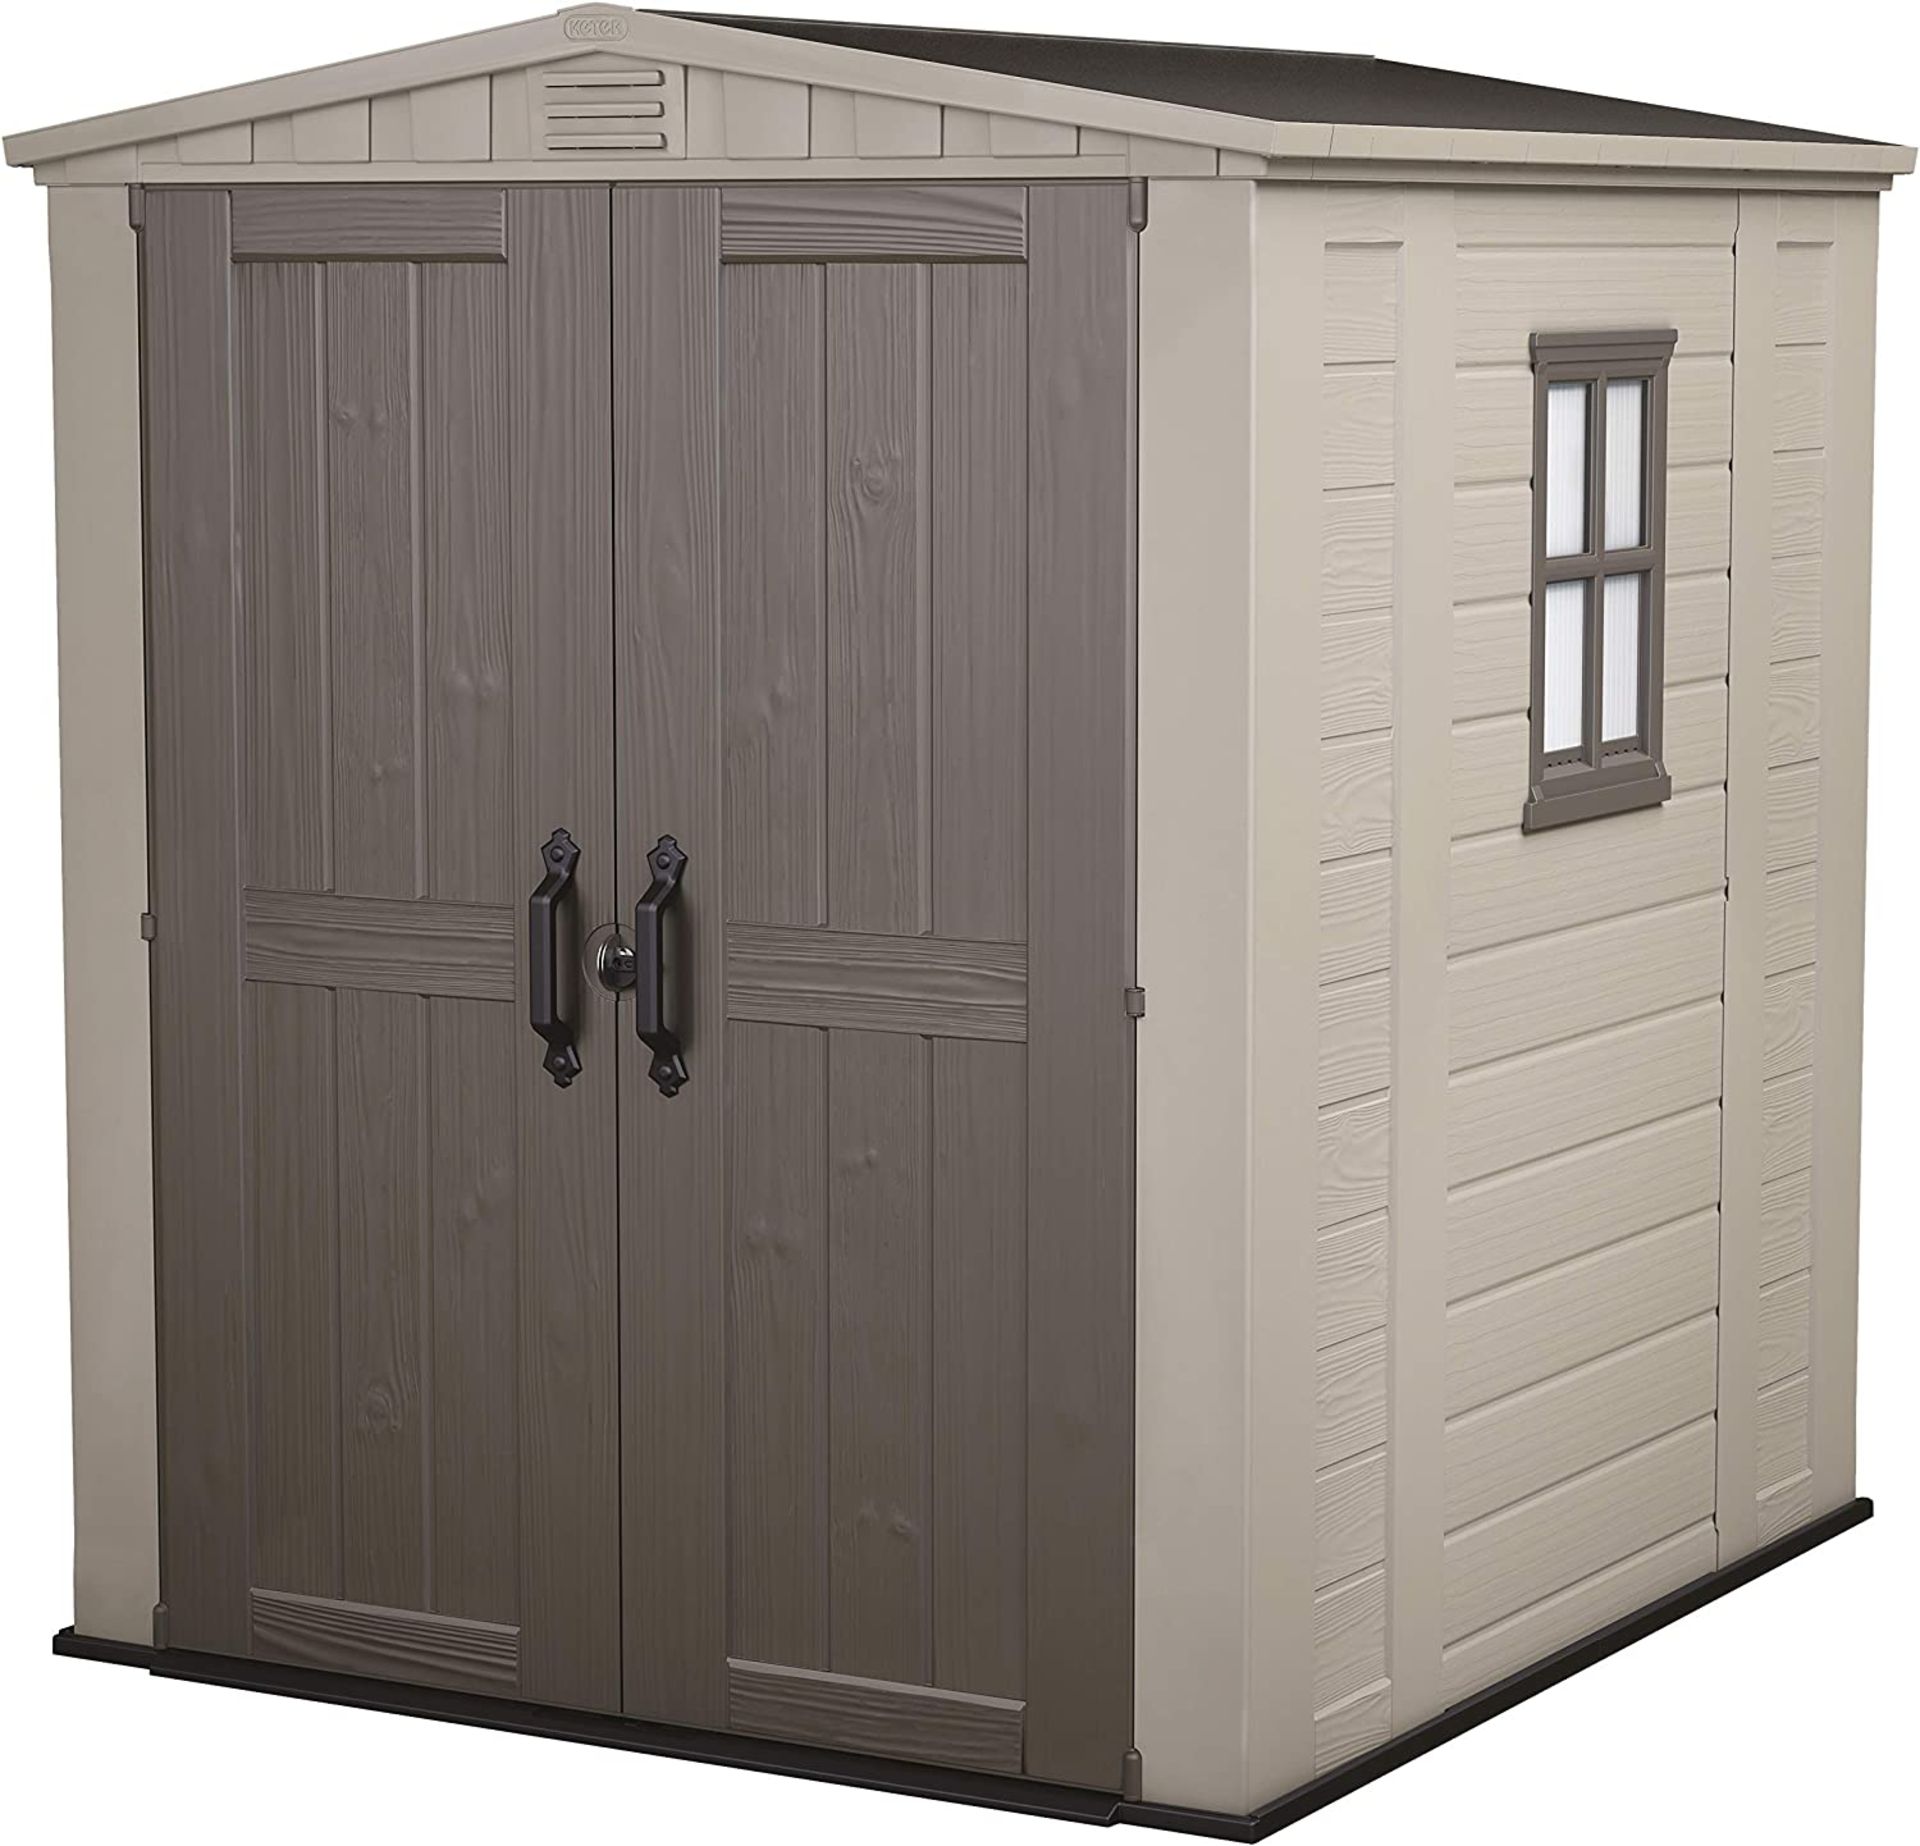 New Keter Factor Garden Plastic Shed. Dimensions: 178 x 195.5 x 208cm (approx.) Material: Resin,